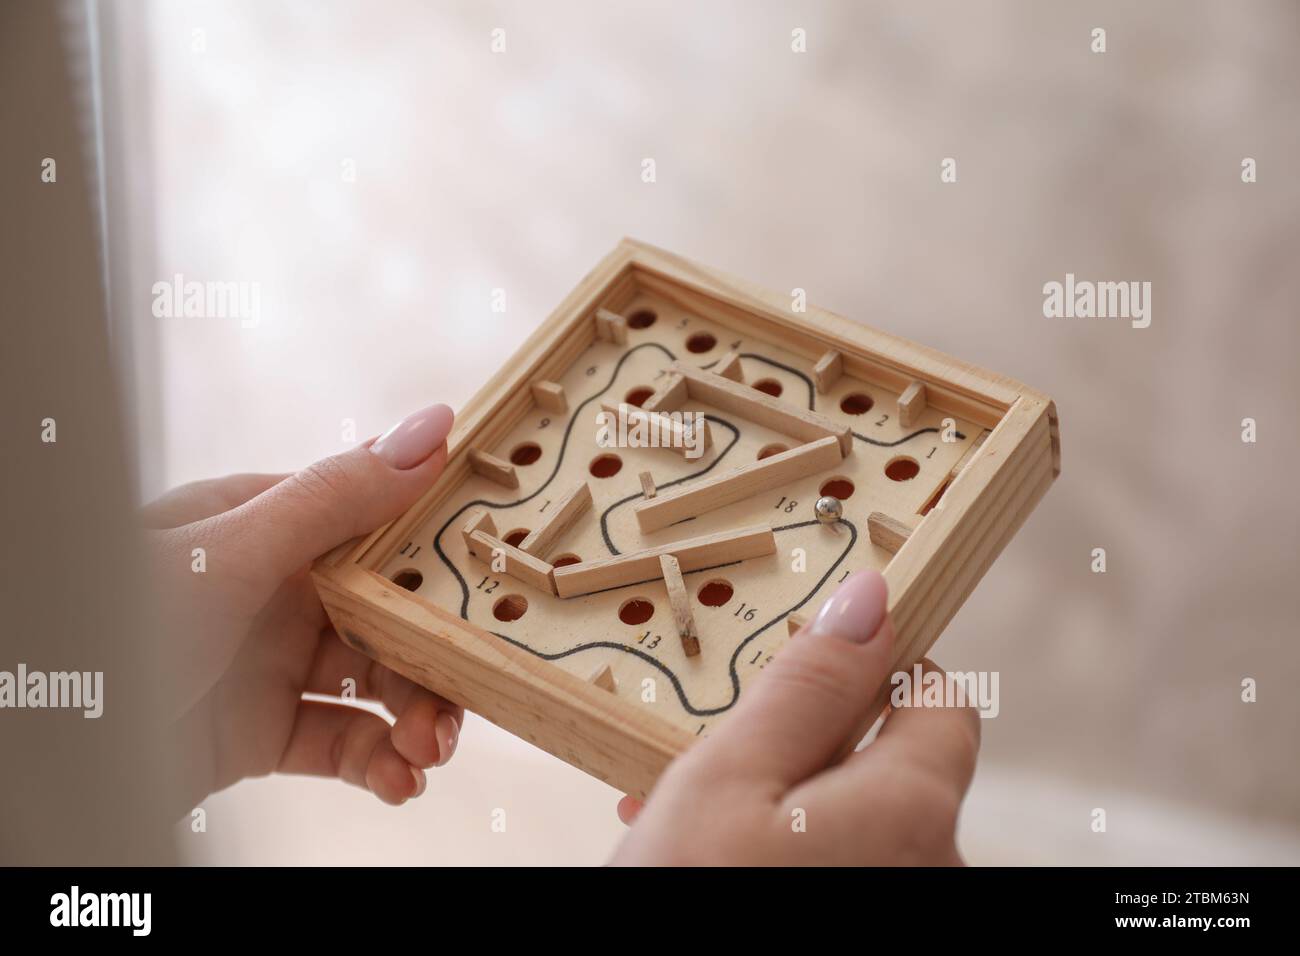 Woman holding wooden toy maze with metal ball on blurred background, closeup Stock Photo